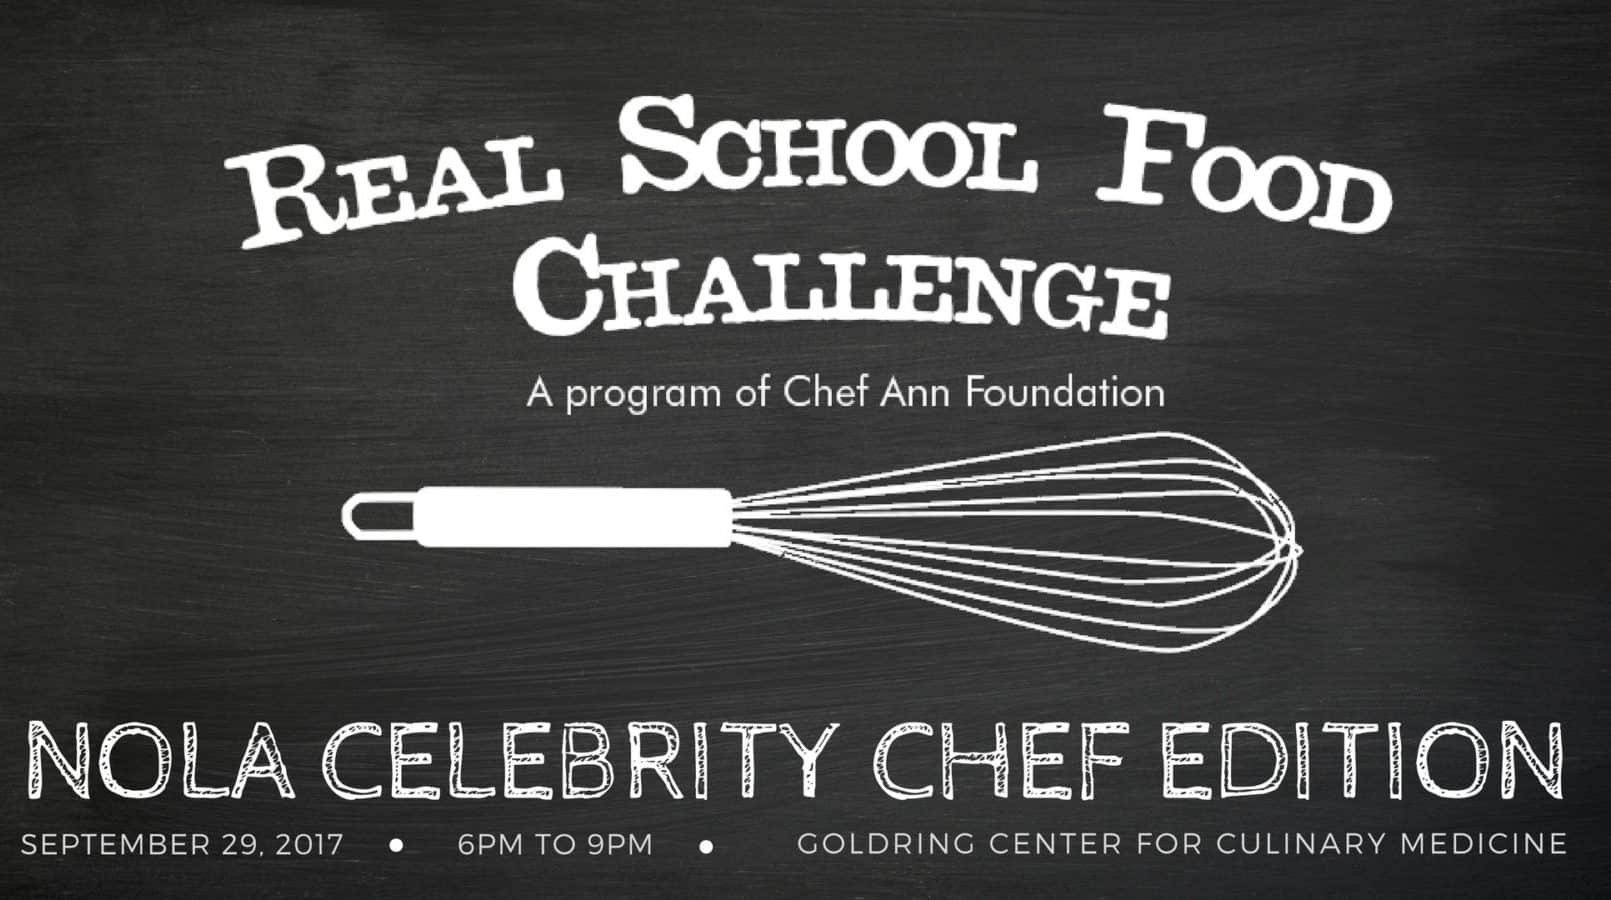 The Chef Ann Foundation is challenging a group of New Orleans’ most prominent chefs to create healthy school lunch recipes for just US$1.25 per meal.